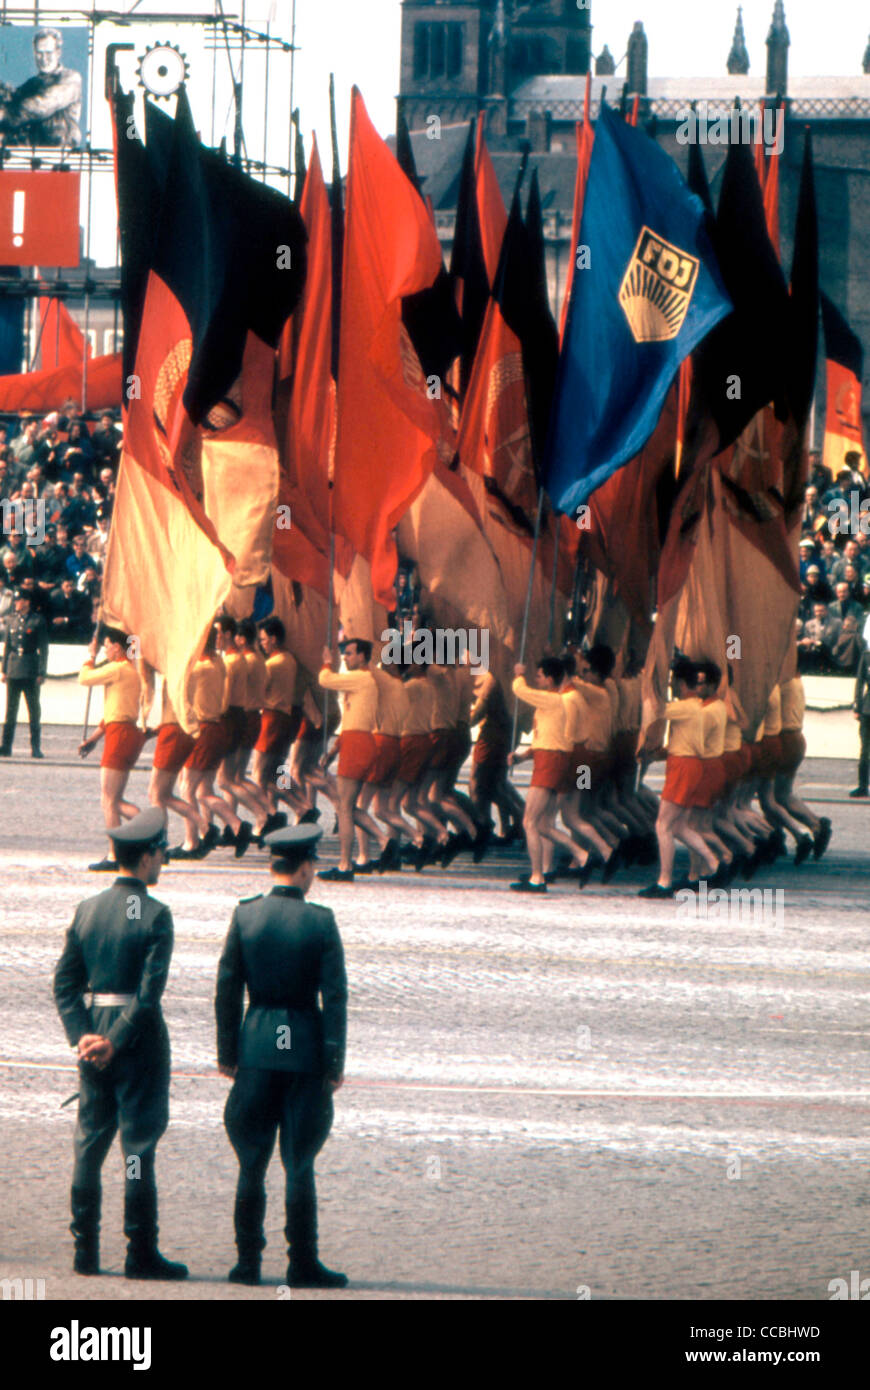 Demonstration on May 1st, 1960 in East Berlin with banners and flags. Stock Photo